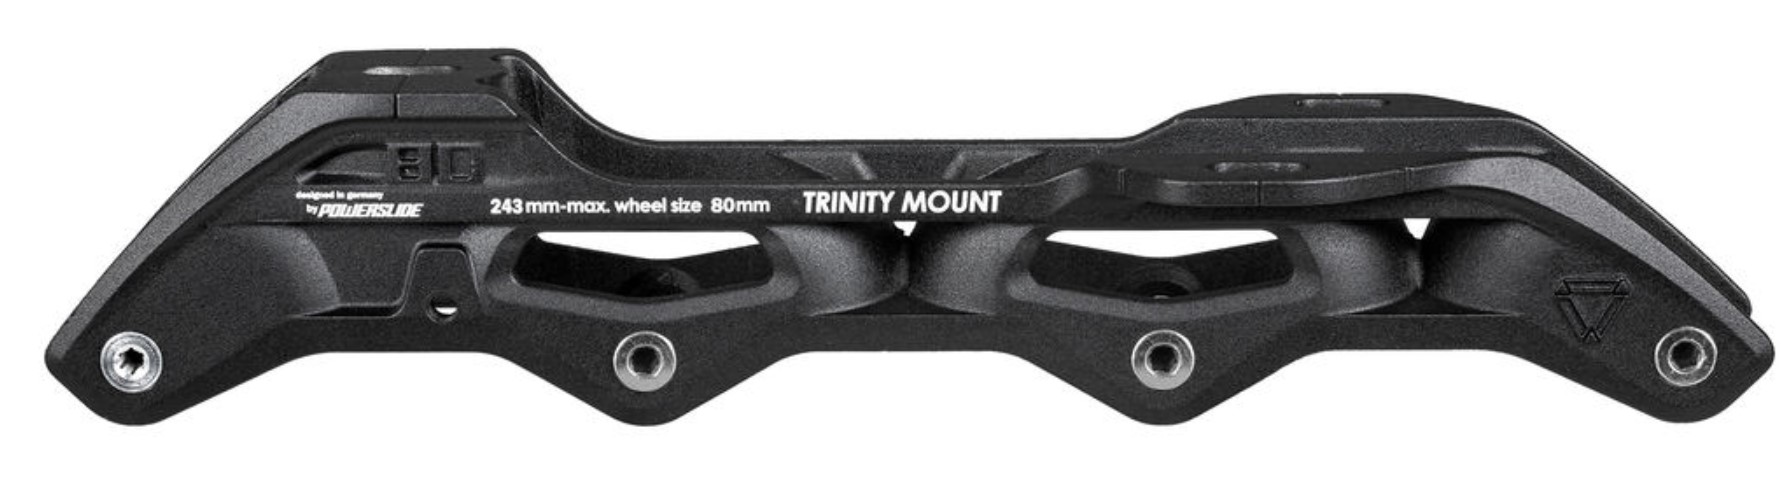 Powerslide black Urban frame for 4x80mm inline skate wheels and a length of 243mm with Trinity mounting